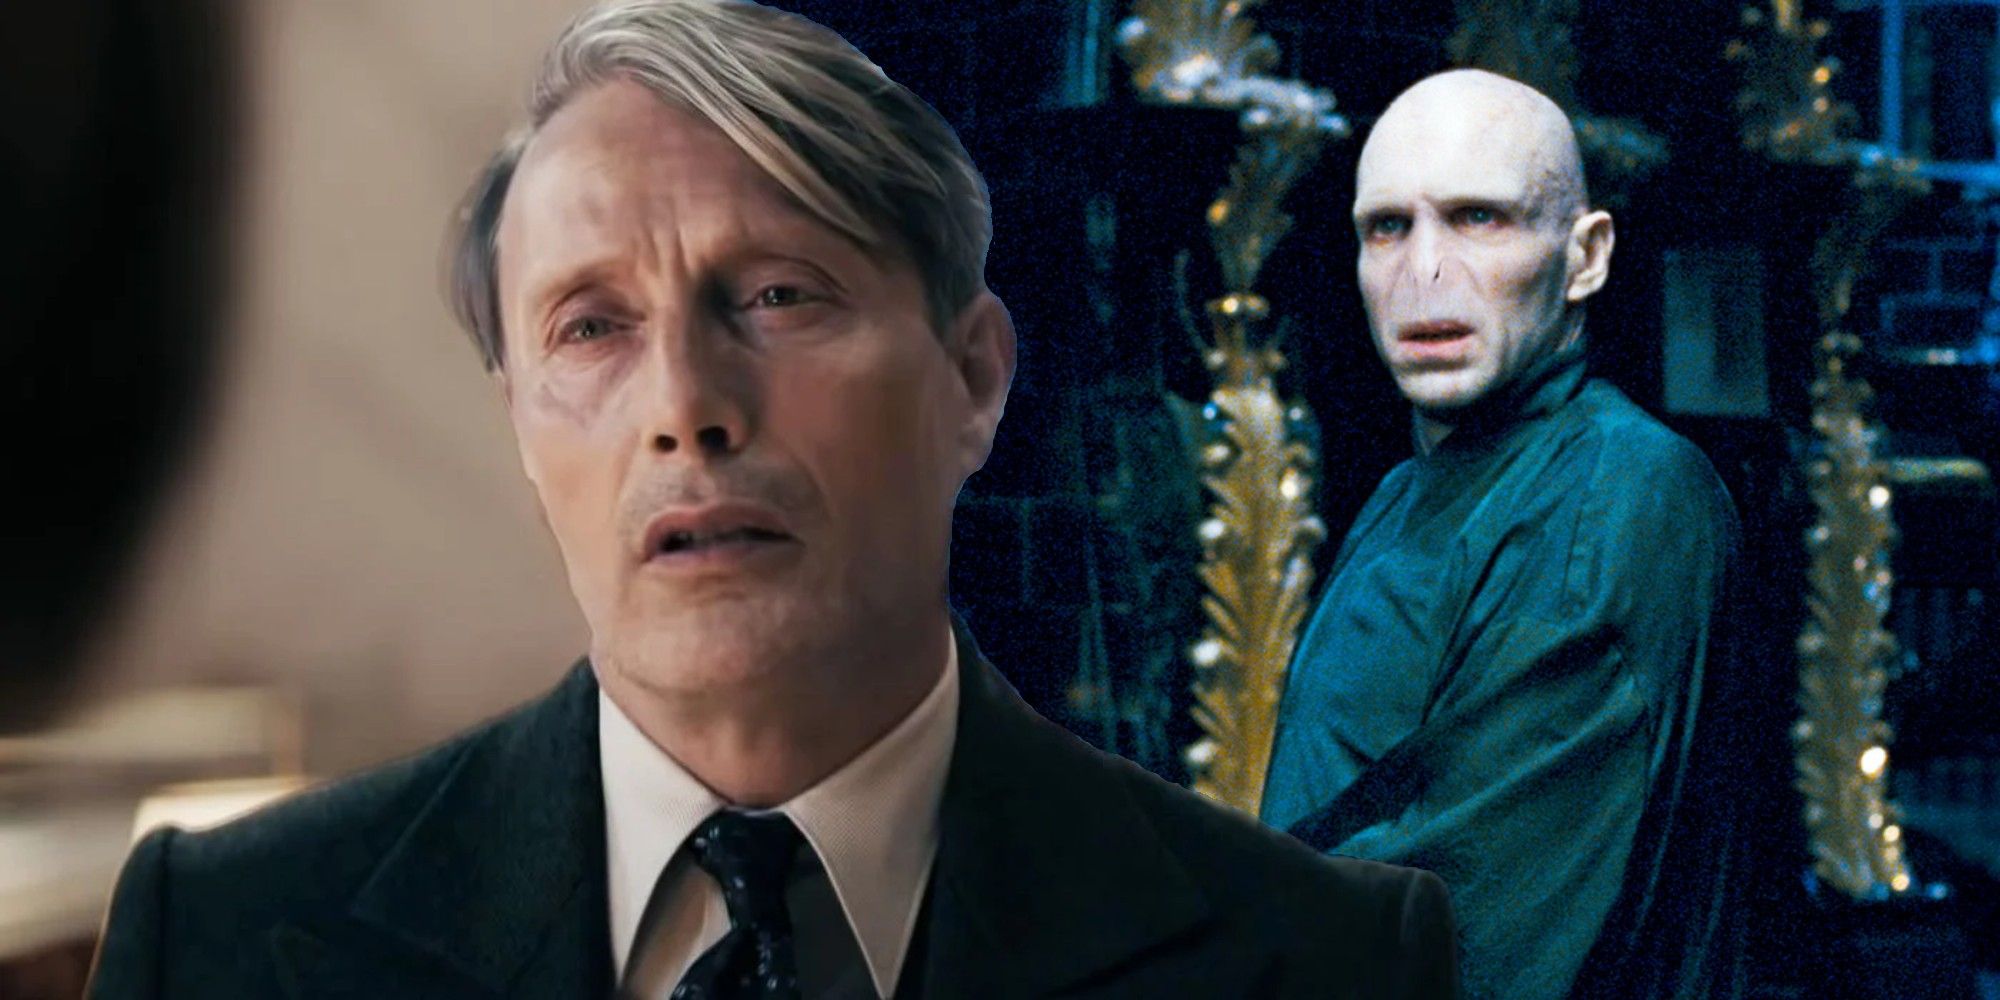 Who is mor powerful voldemort of Grindelwald